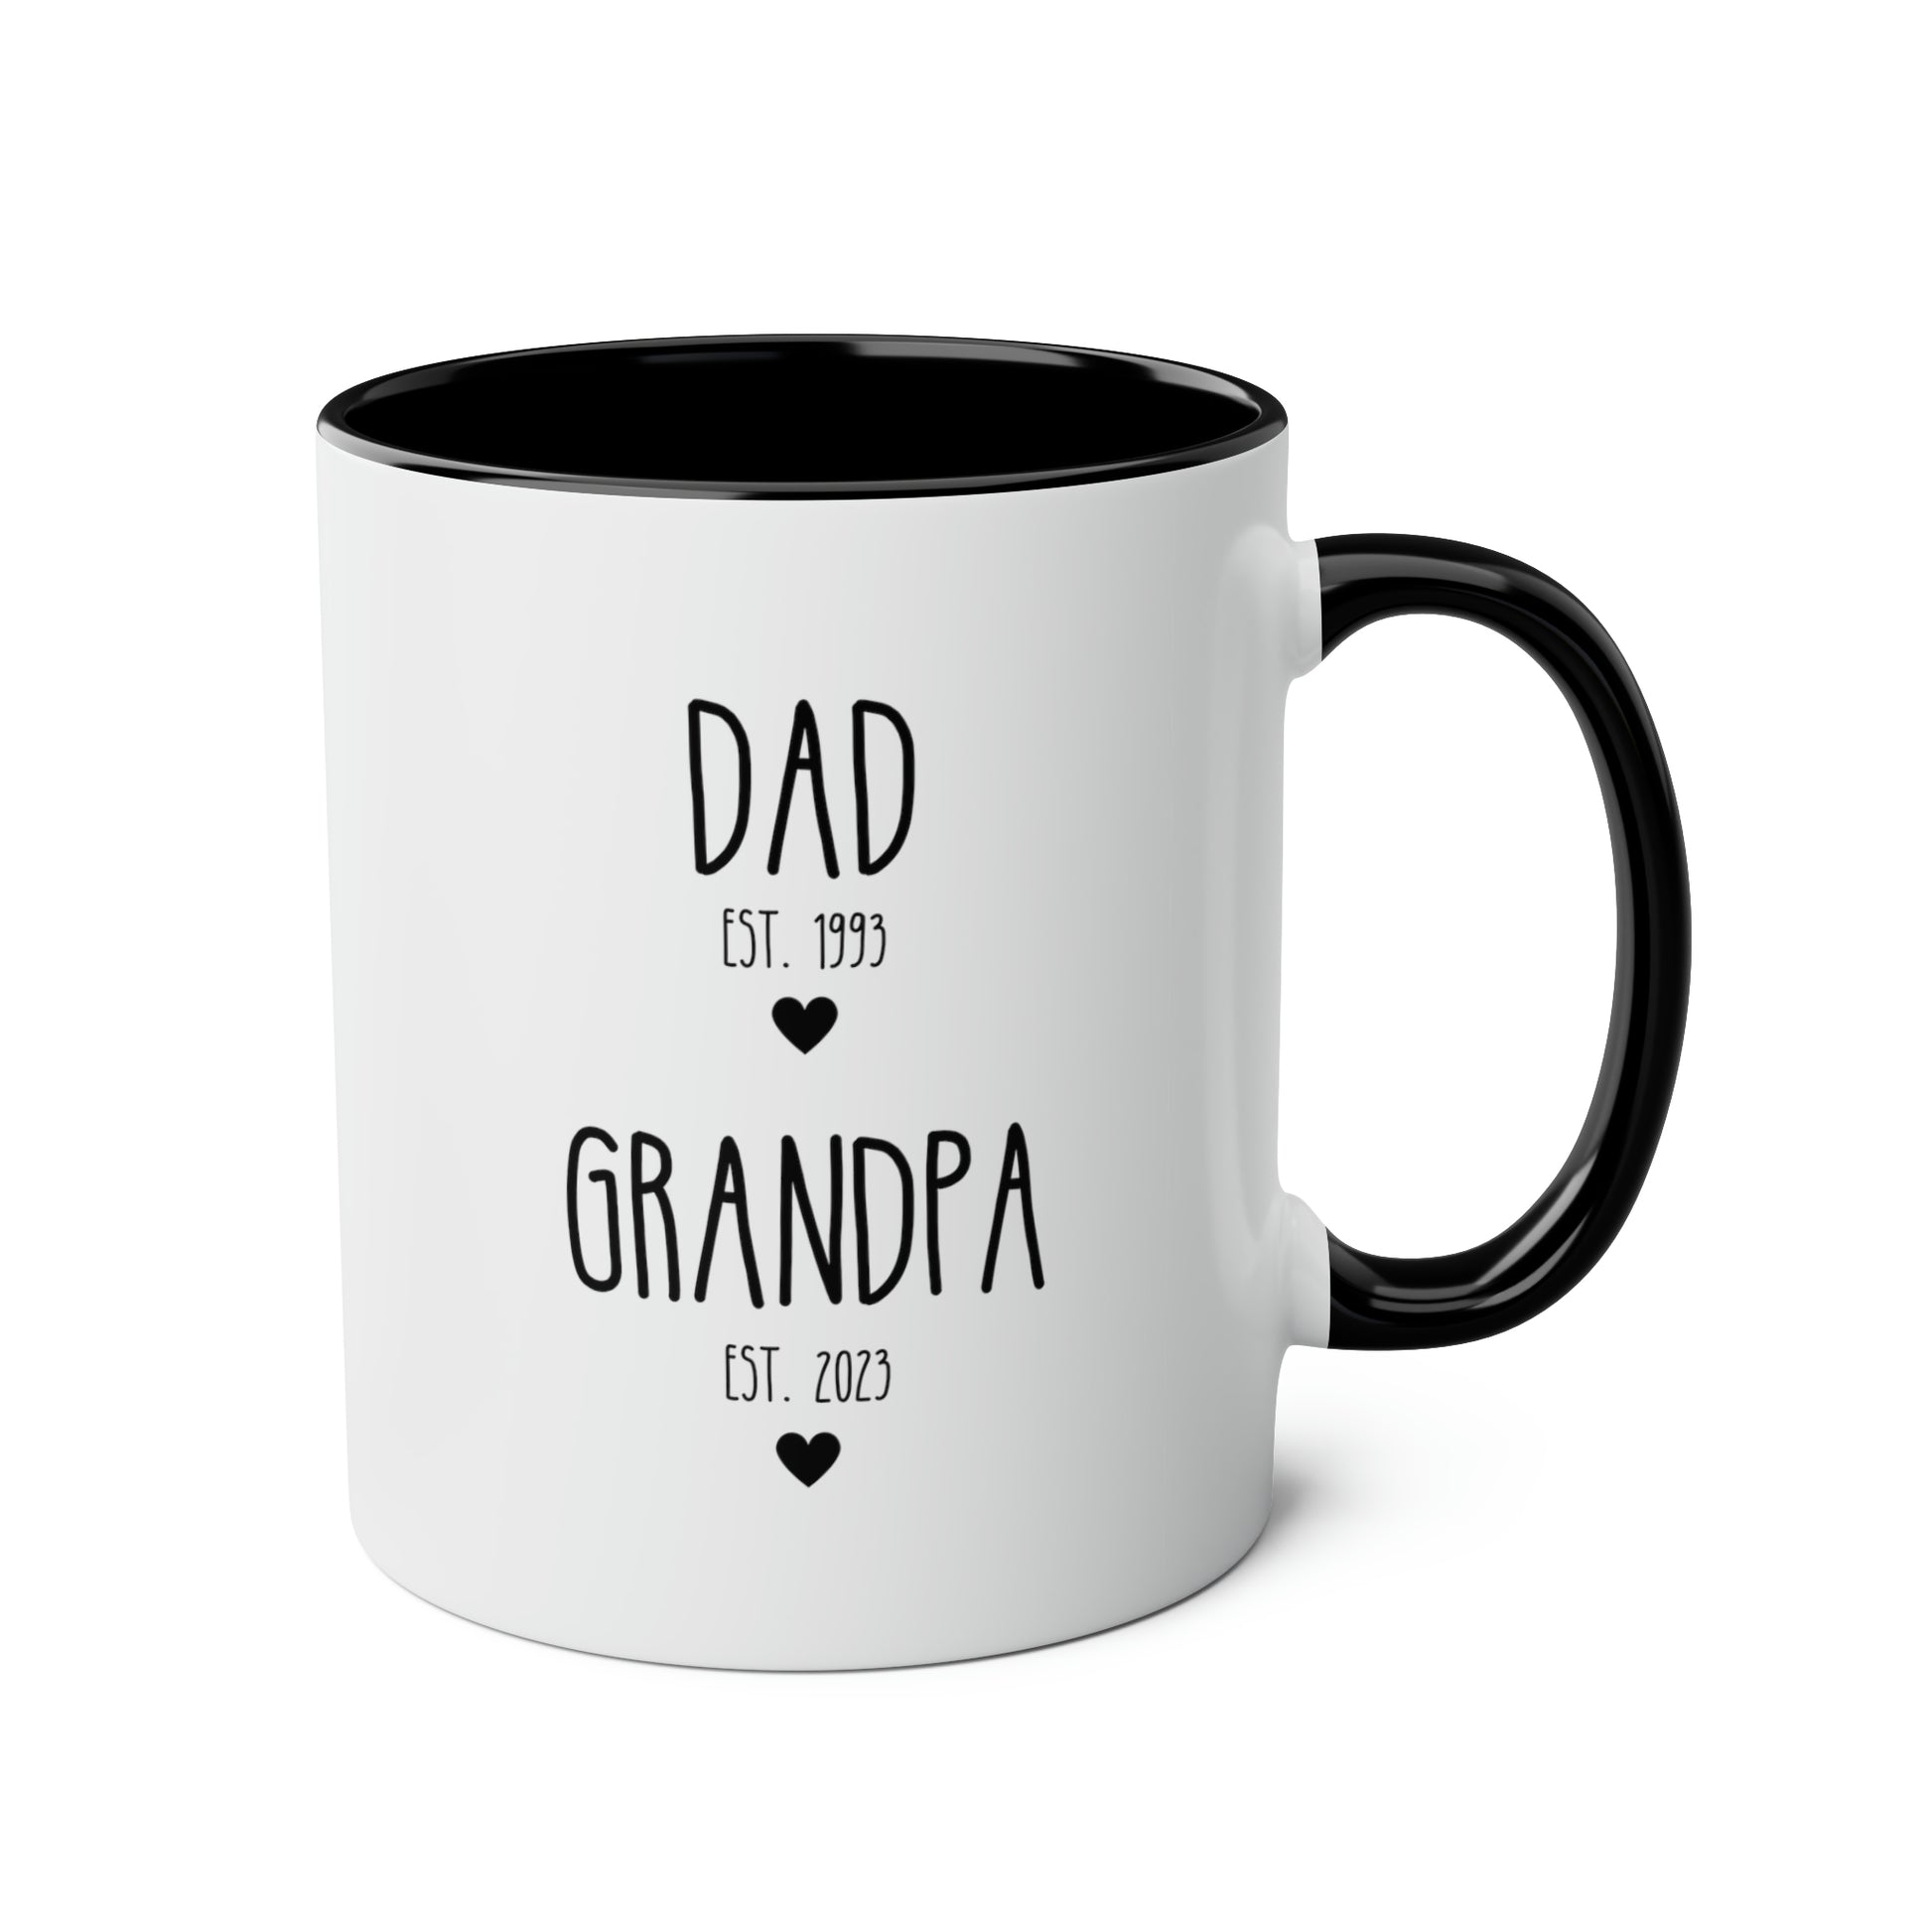 Dad Est Grandpa Est 11oz white with black accent funny large coffee mug gift for new grandpa first time grandfather pregnancy announcement custom date customize personalize waveywares wavey wares wavywares wavy wares